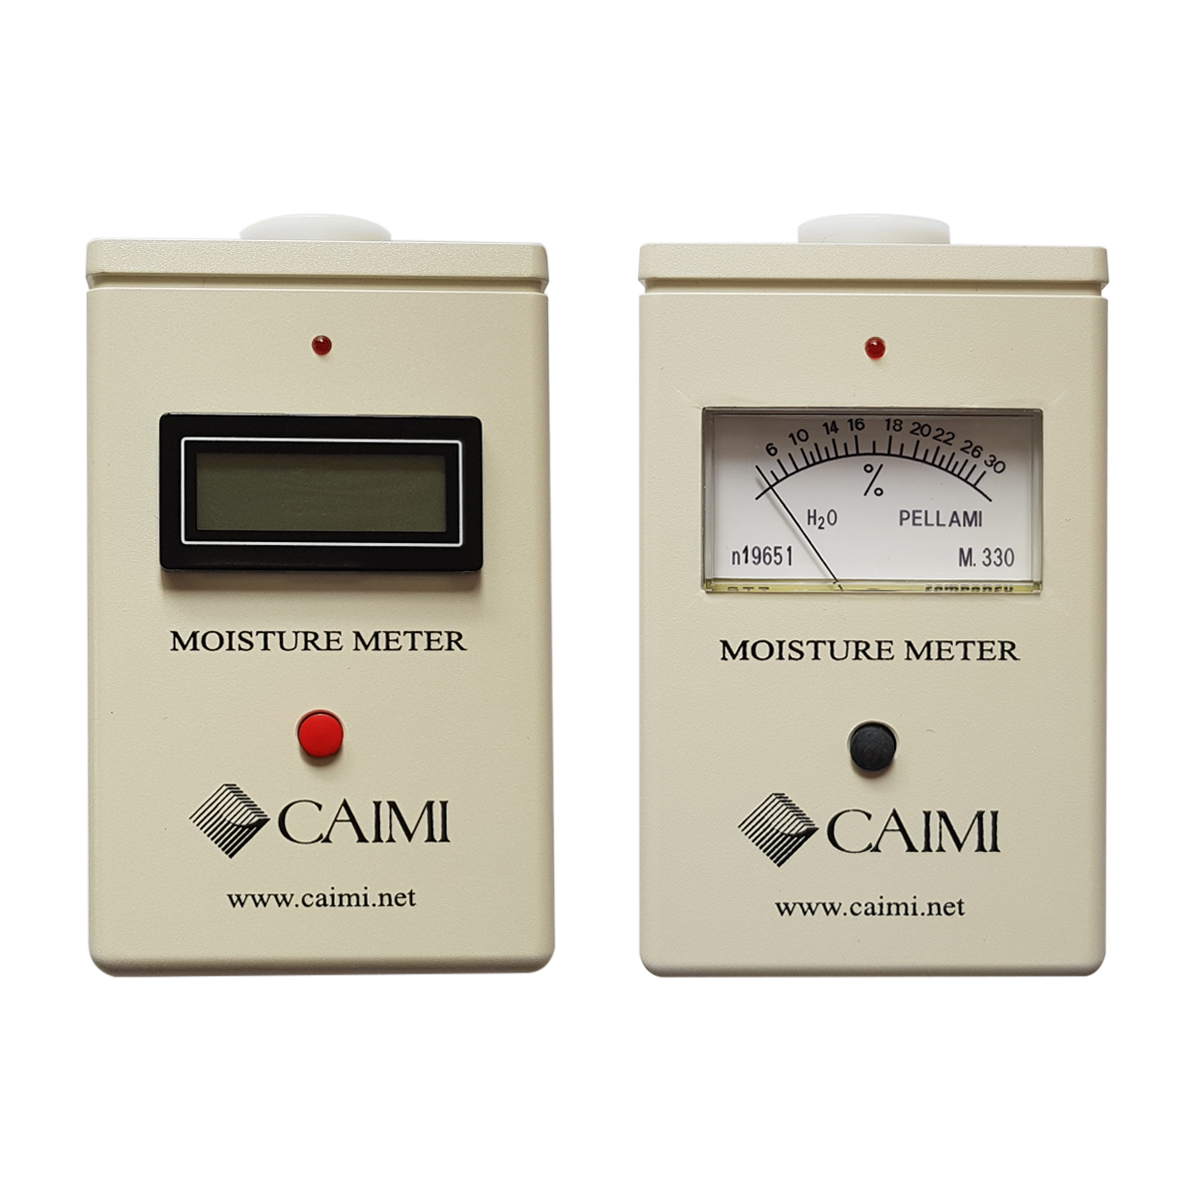 leather-moisture-meter- measuring-umidity-tannery-caimisrl